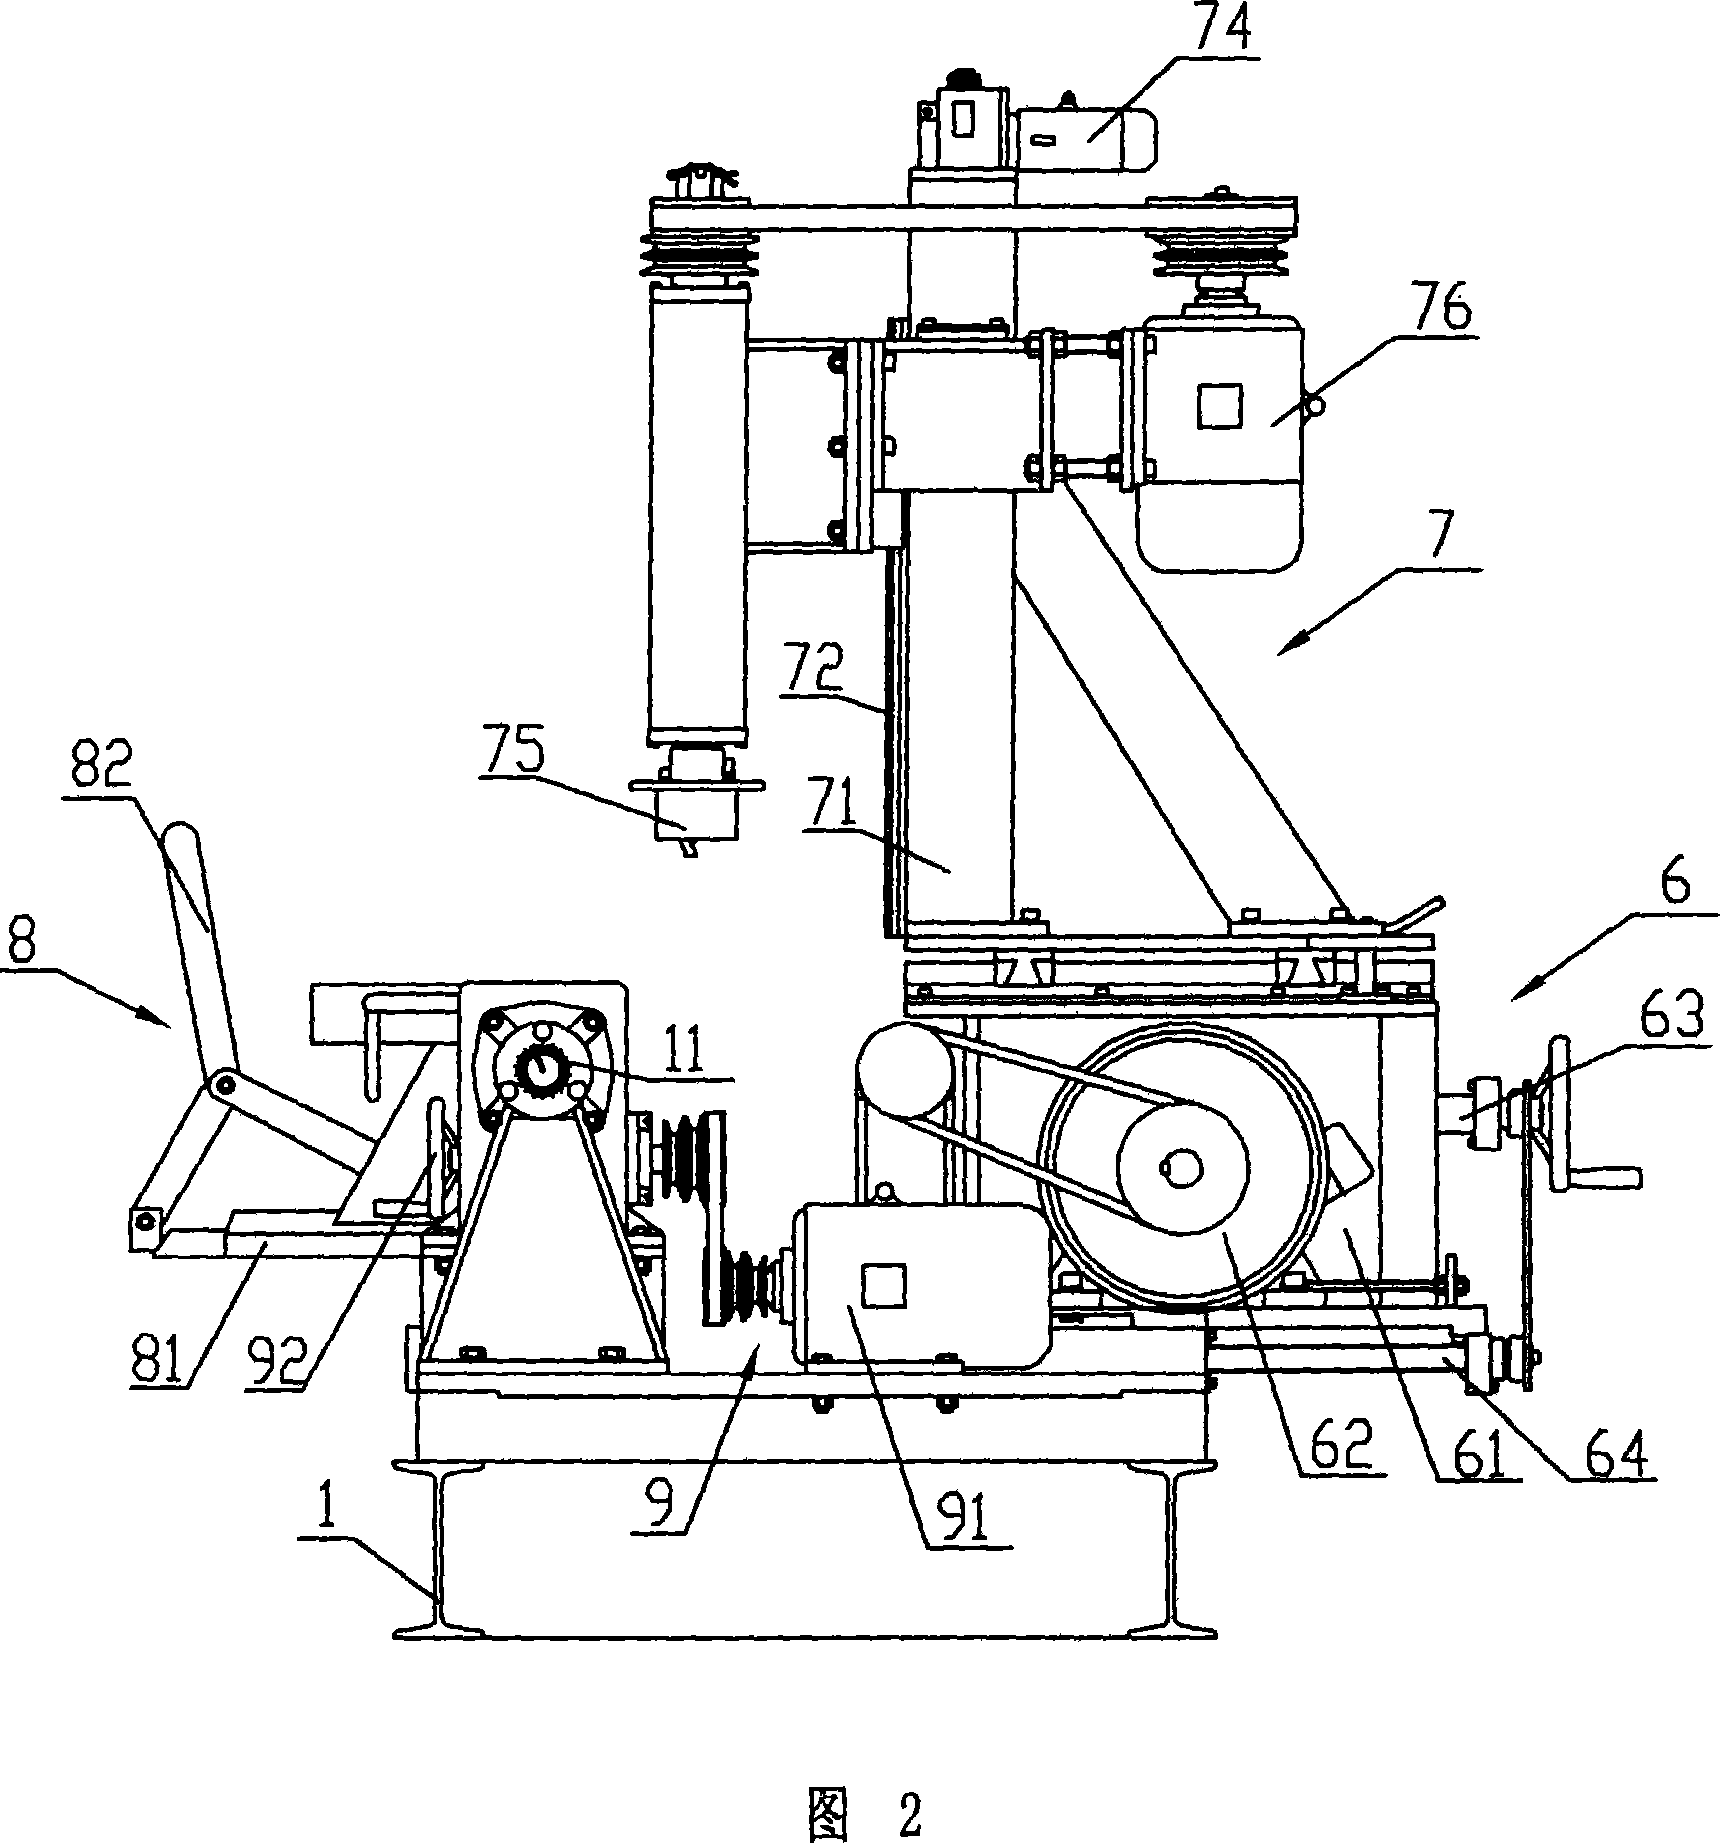 Carpentry machine tool used for log processing